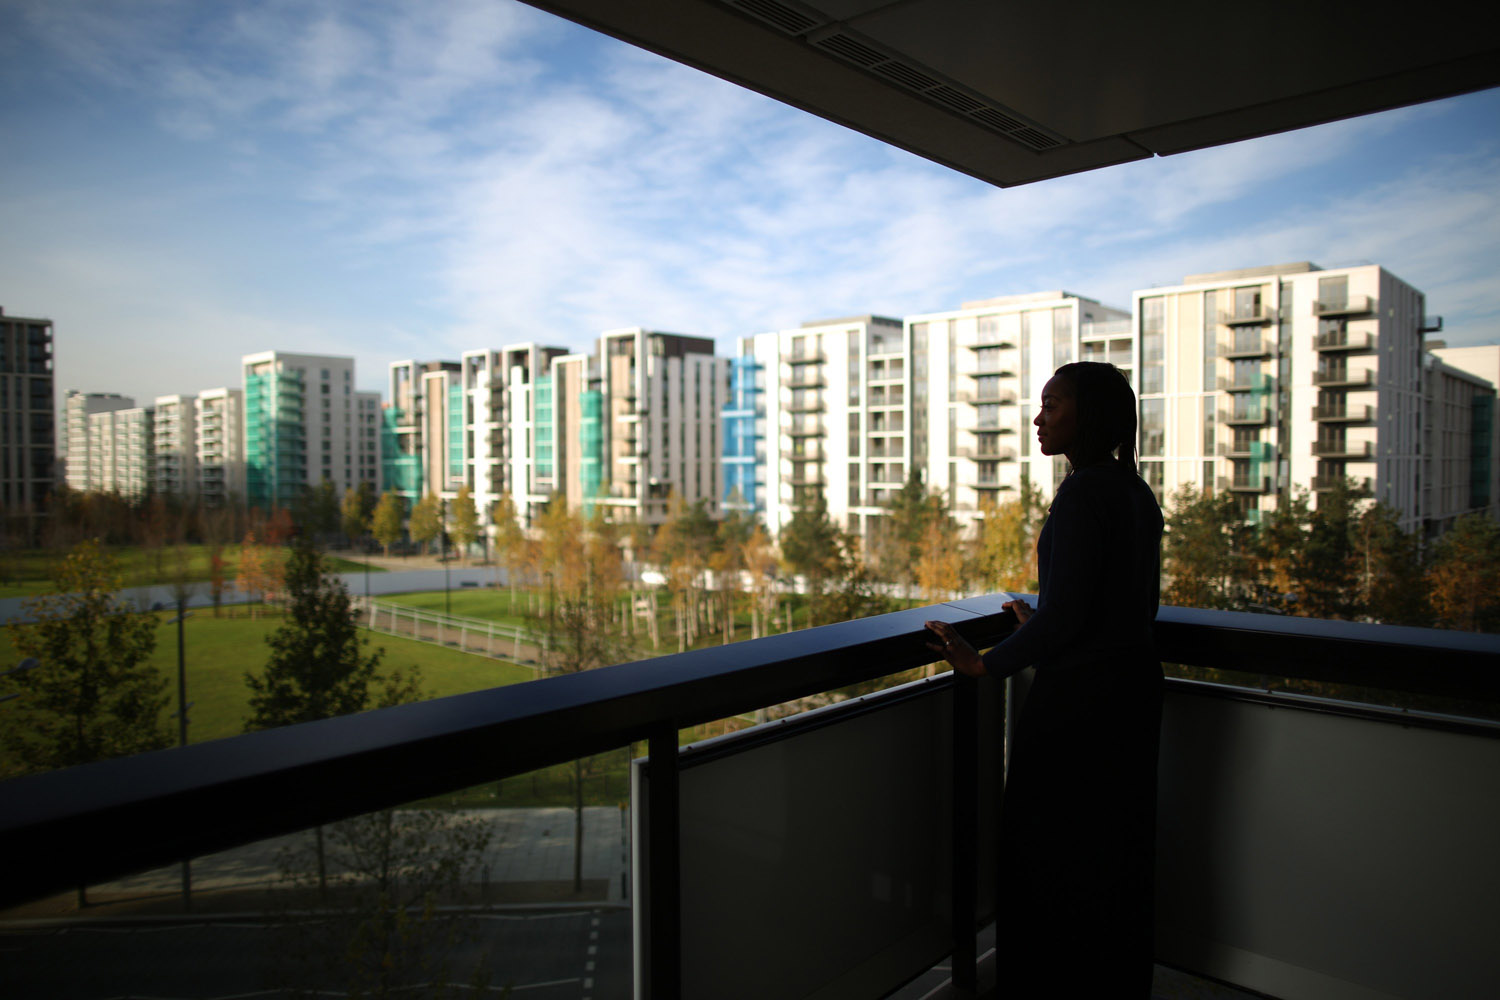 Nov. 26, 2013. Resident Shardae Carr stands on her balcony at the newly transformed East Village near the Olympic Stadium in London.